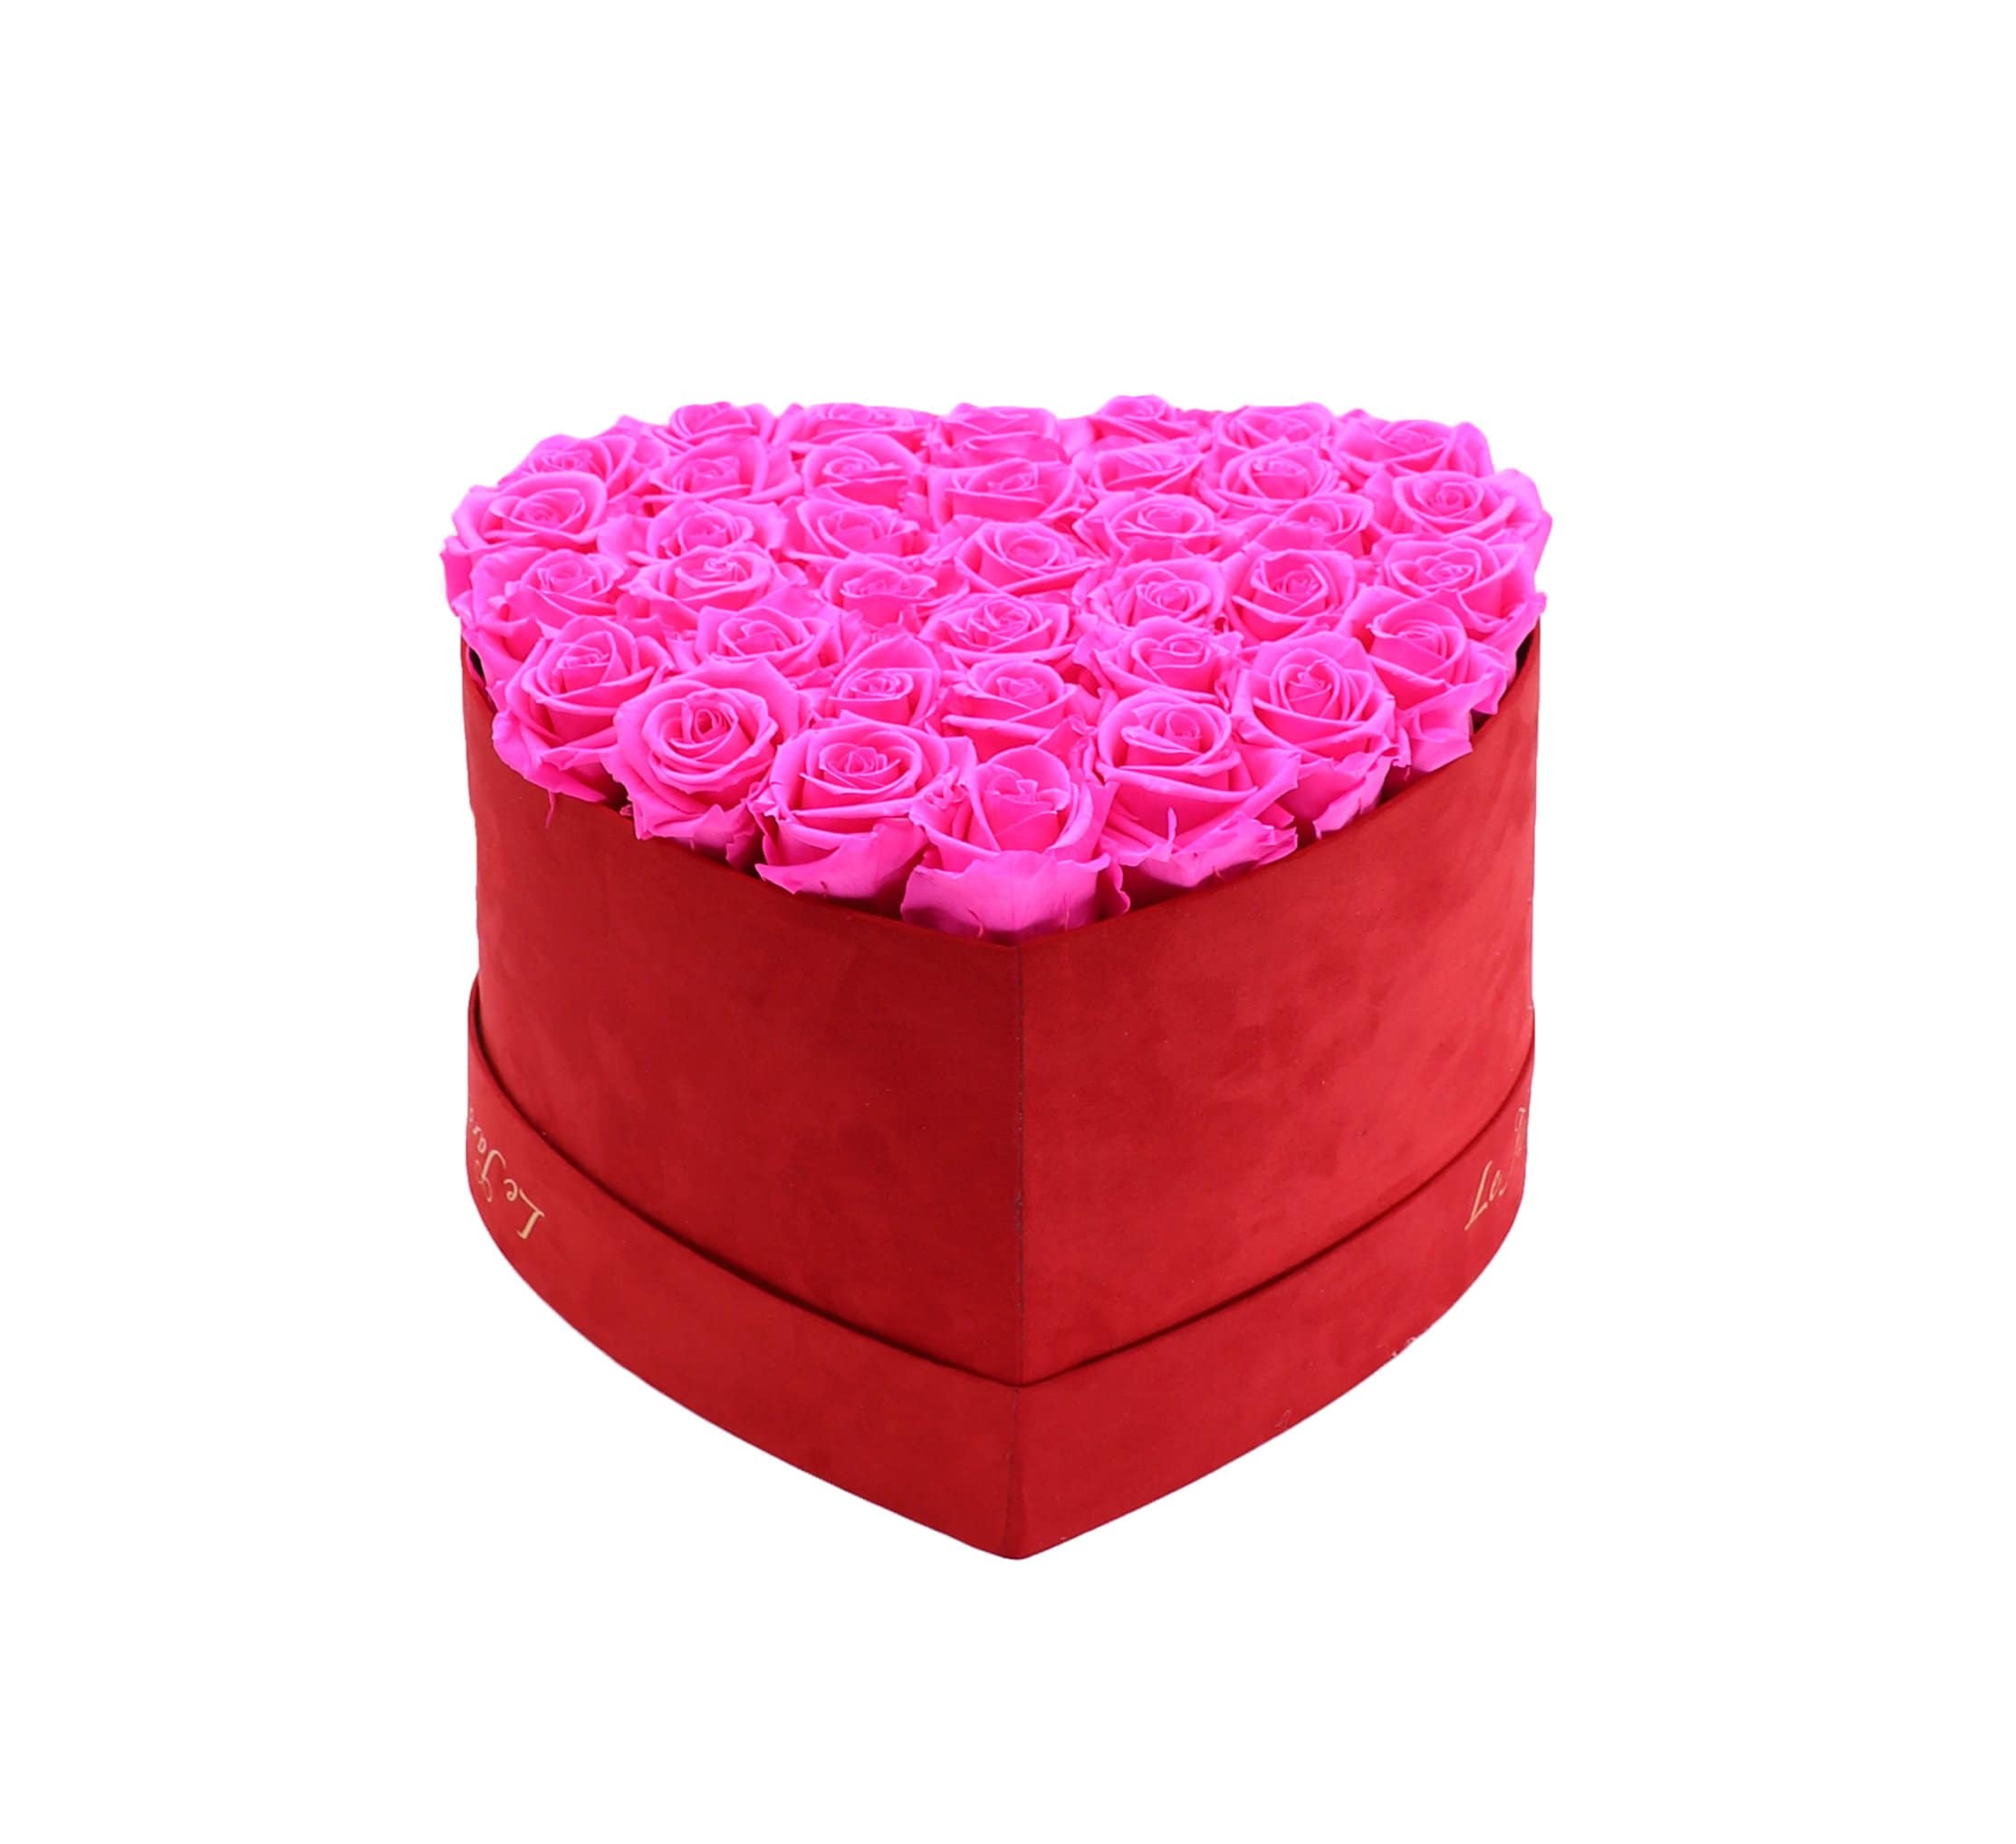 Neon Pink Preserved Roses in A Heart Shaped Box- Small Heart Luxury Red Suede Box - Le Jardin Infini Roses in a Box